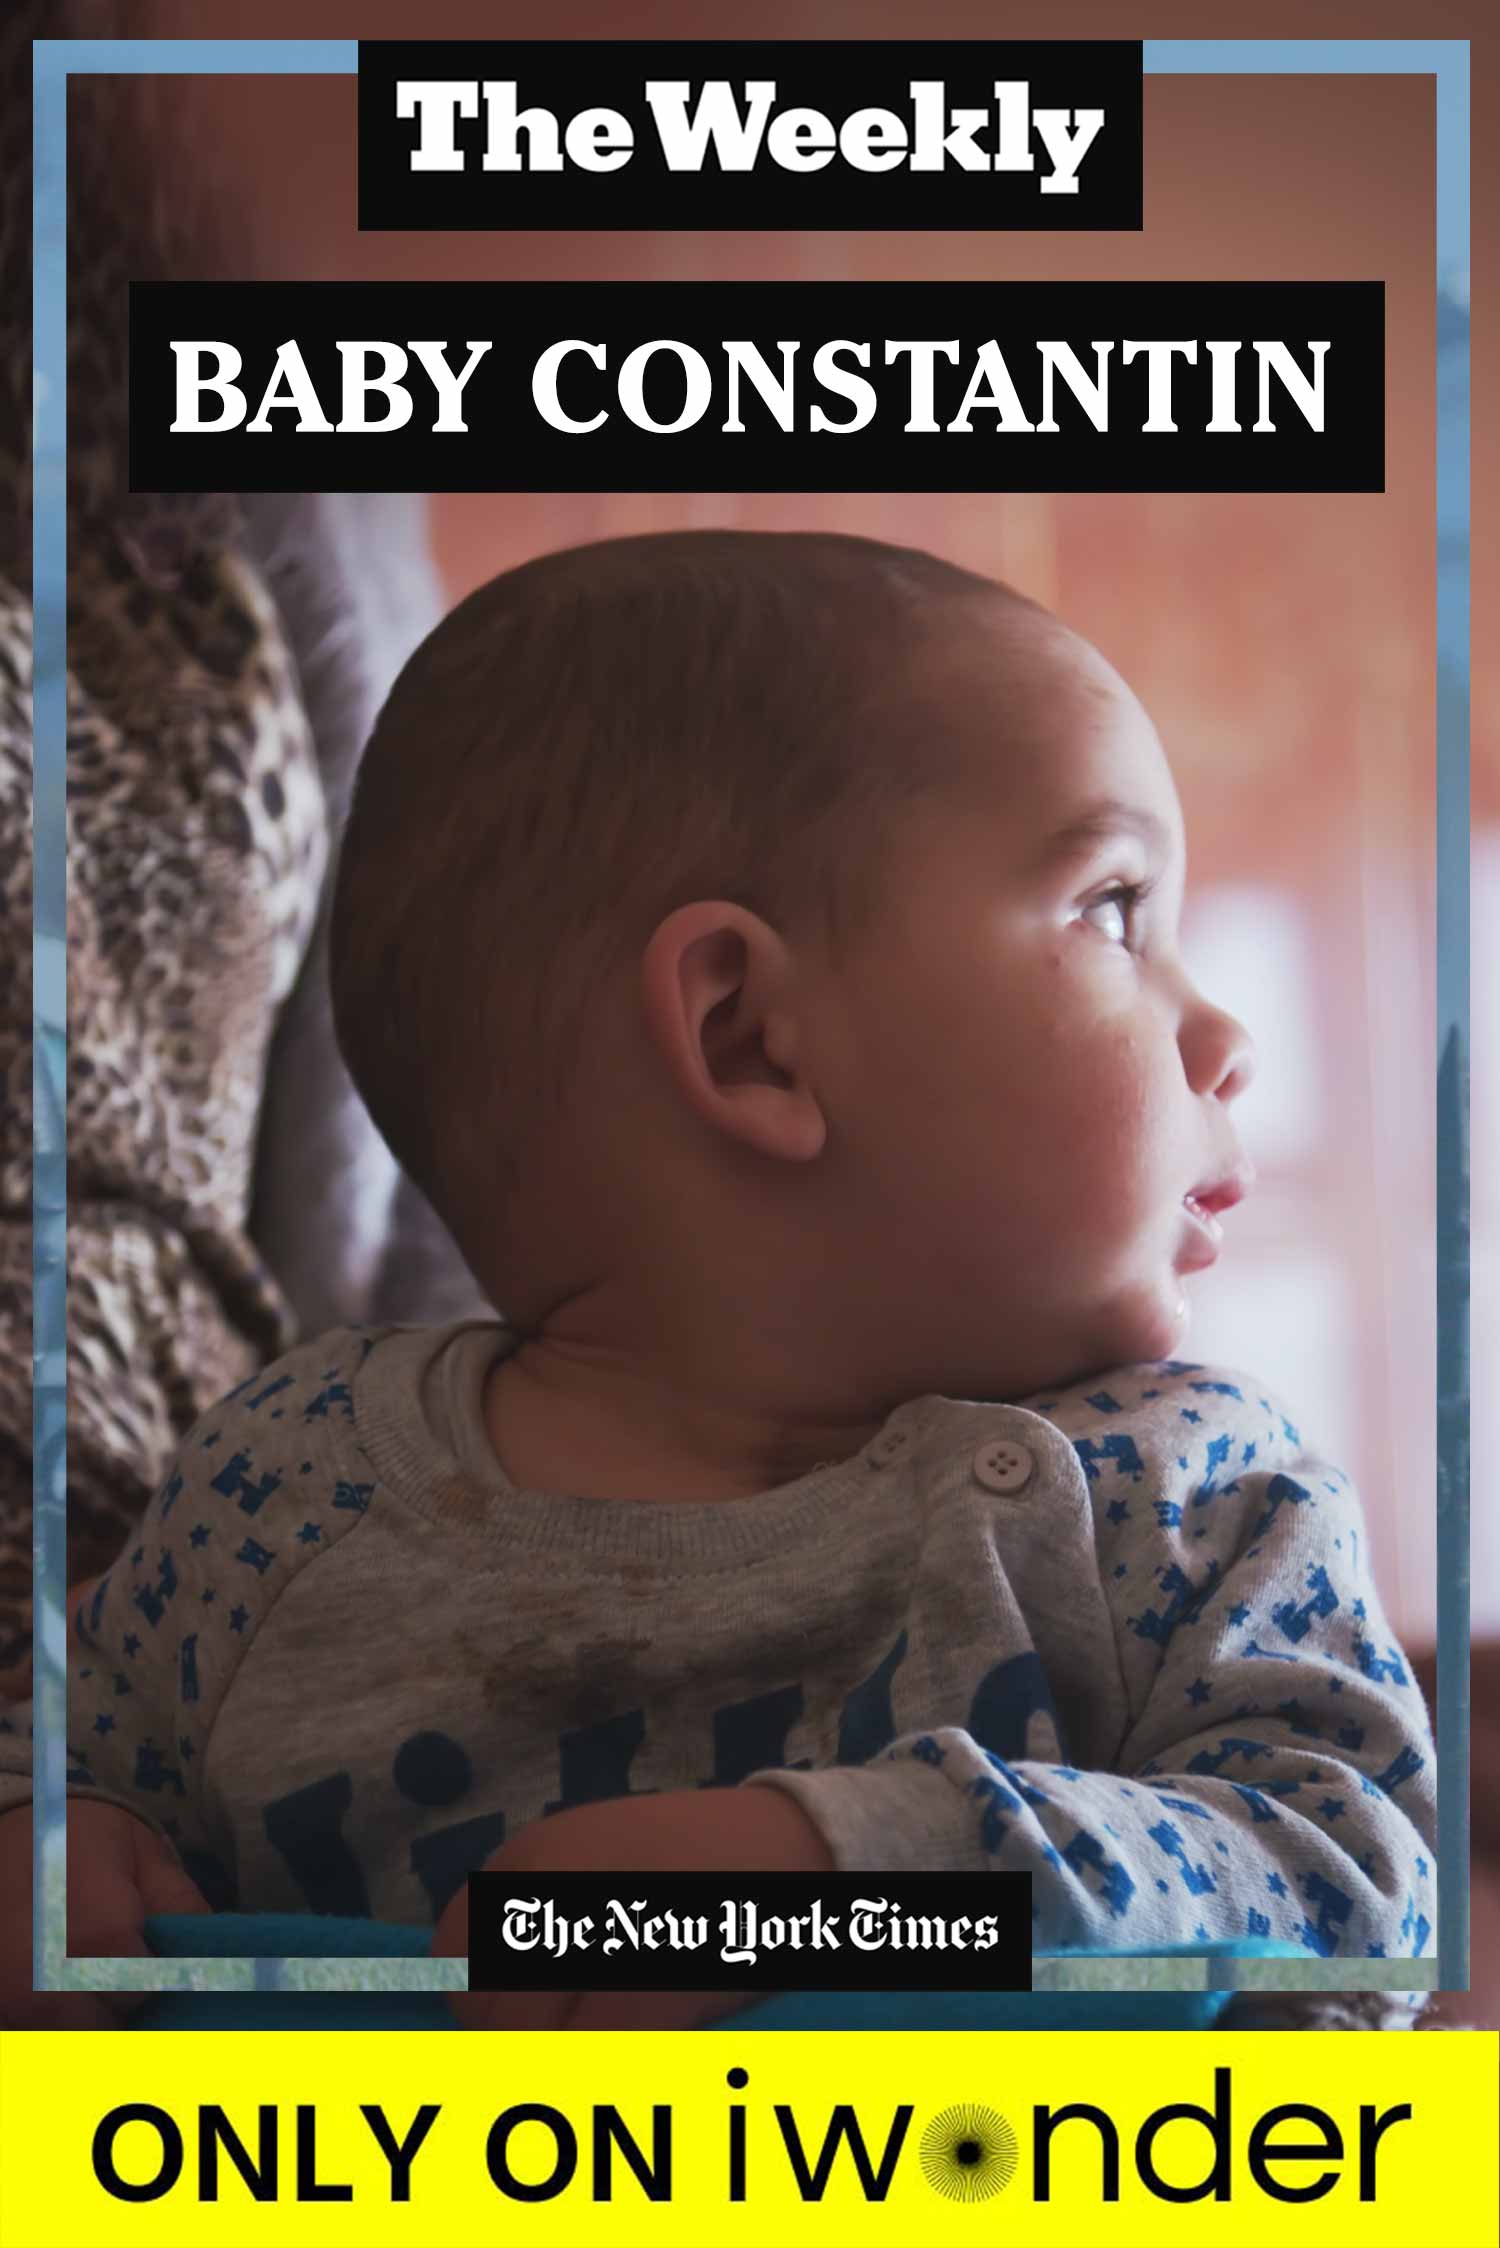 The Weekly: Baby Constantin